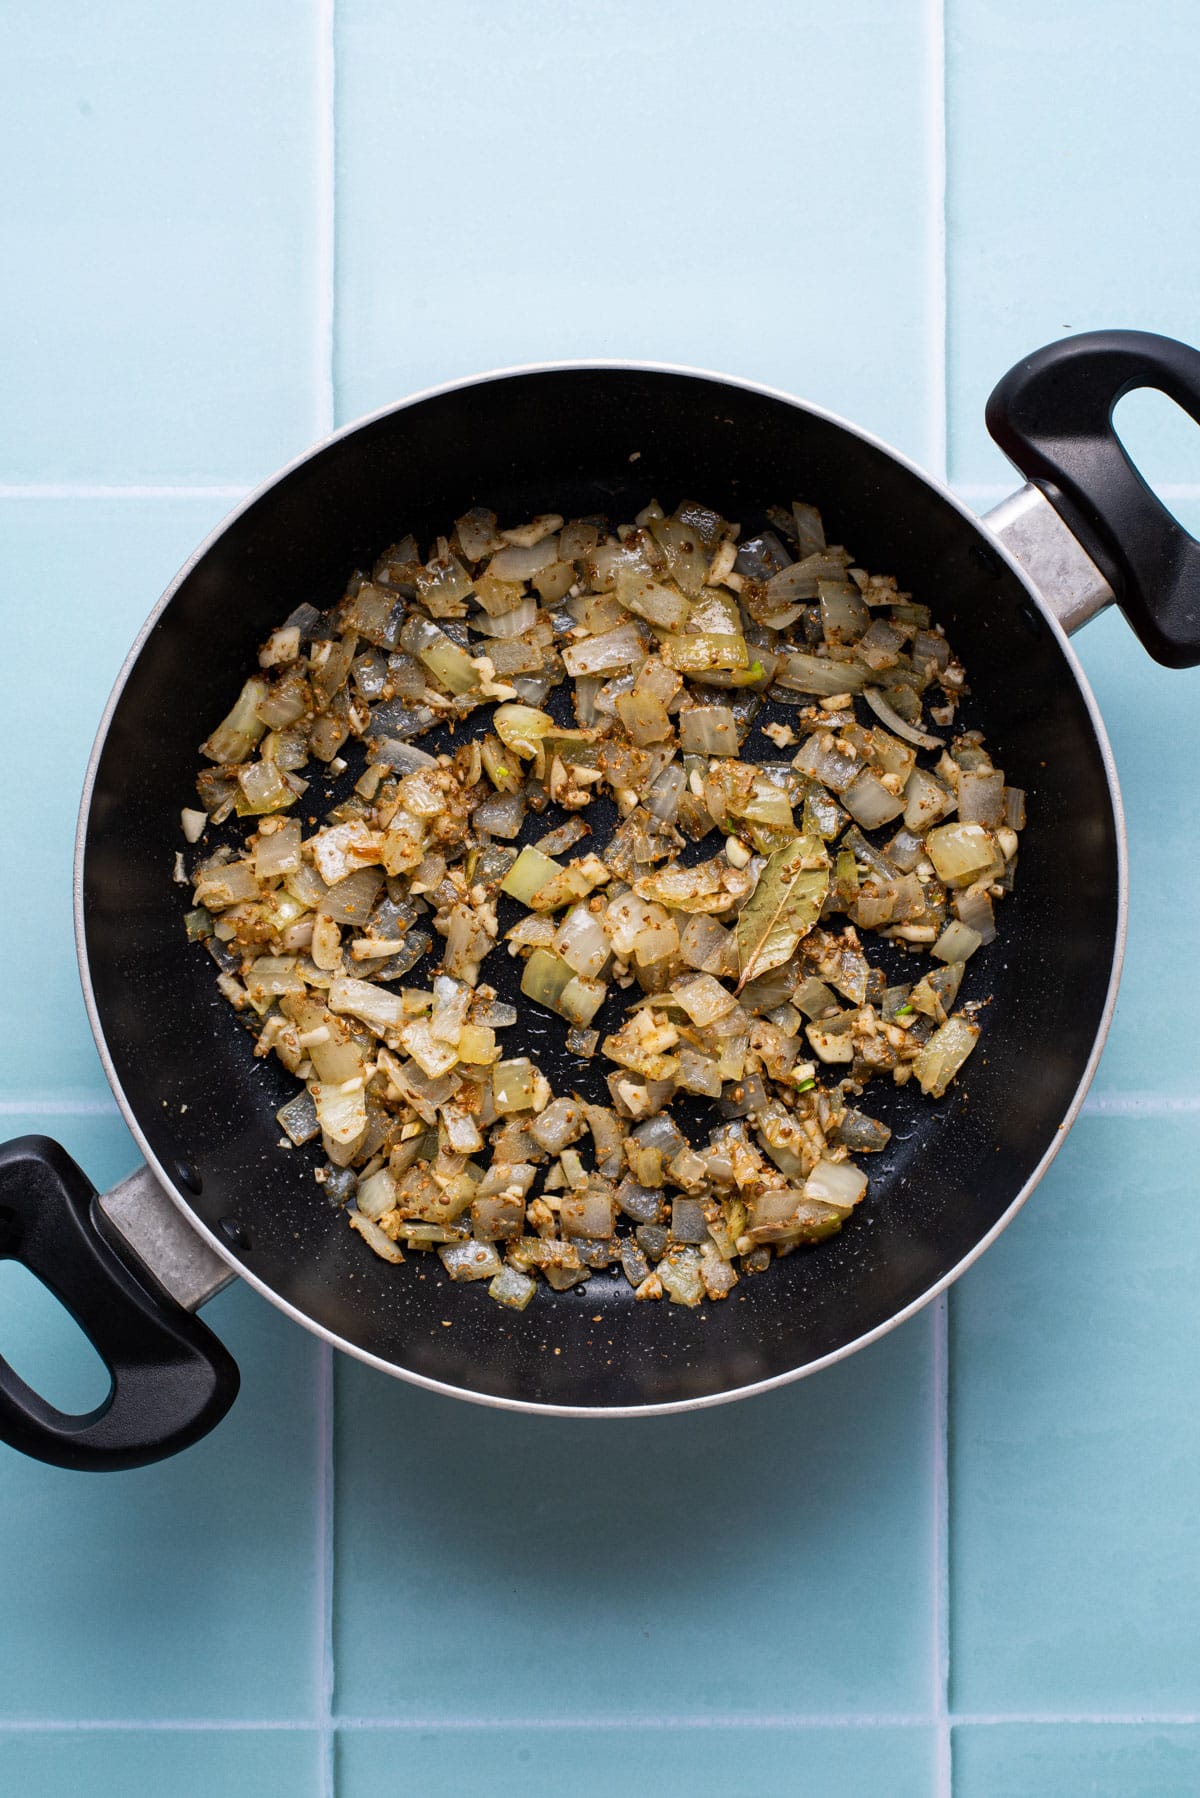 Sauteed onions and spices.